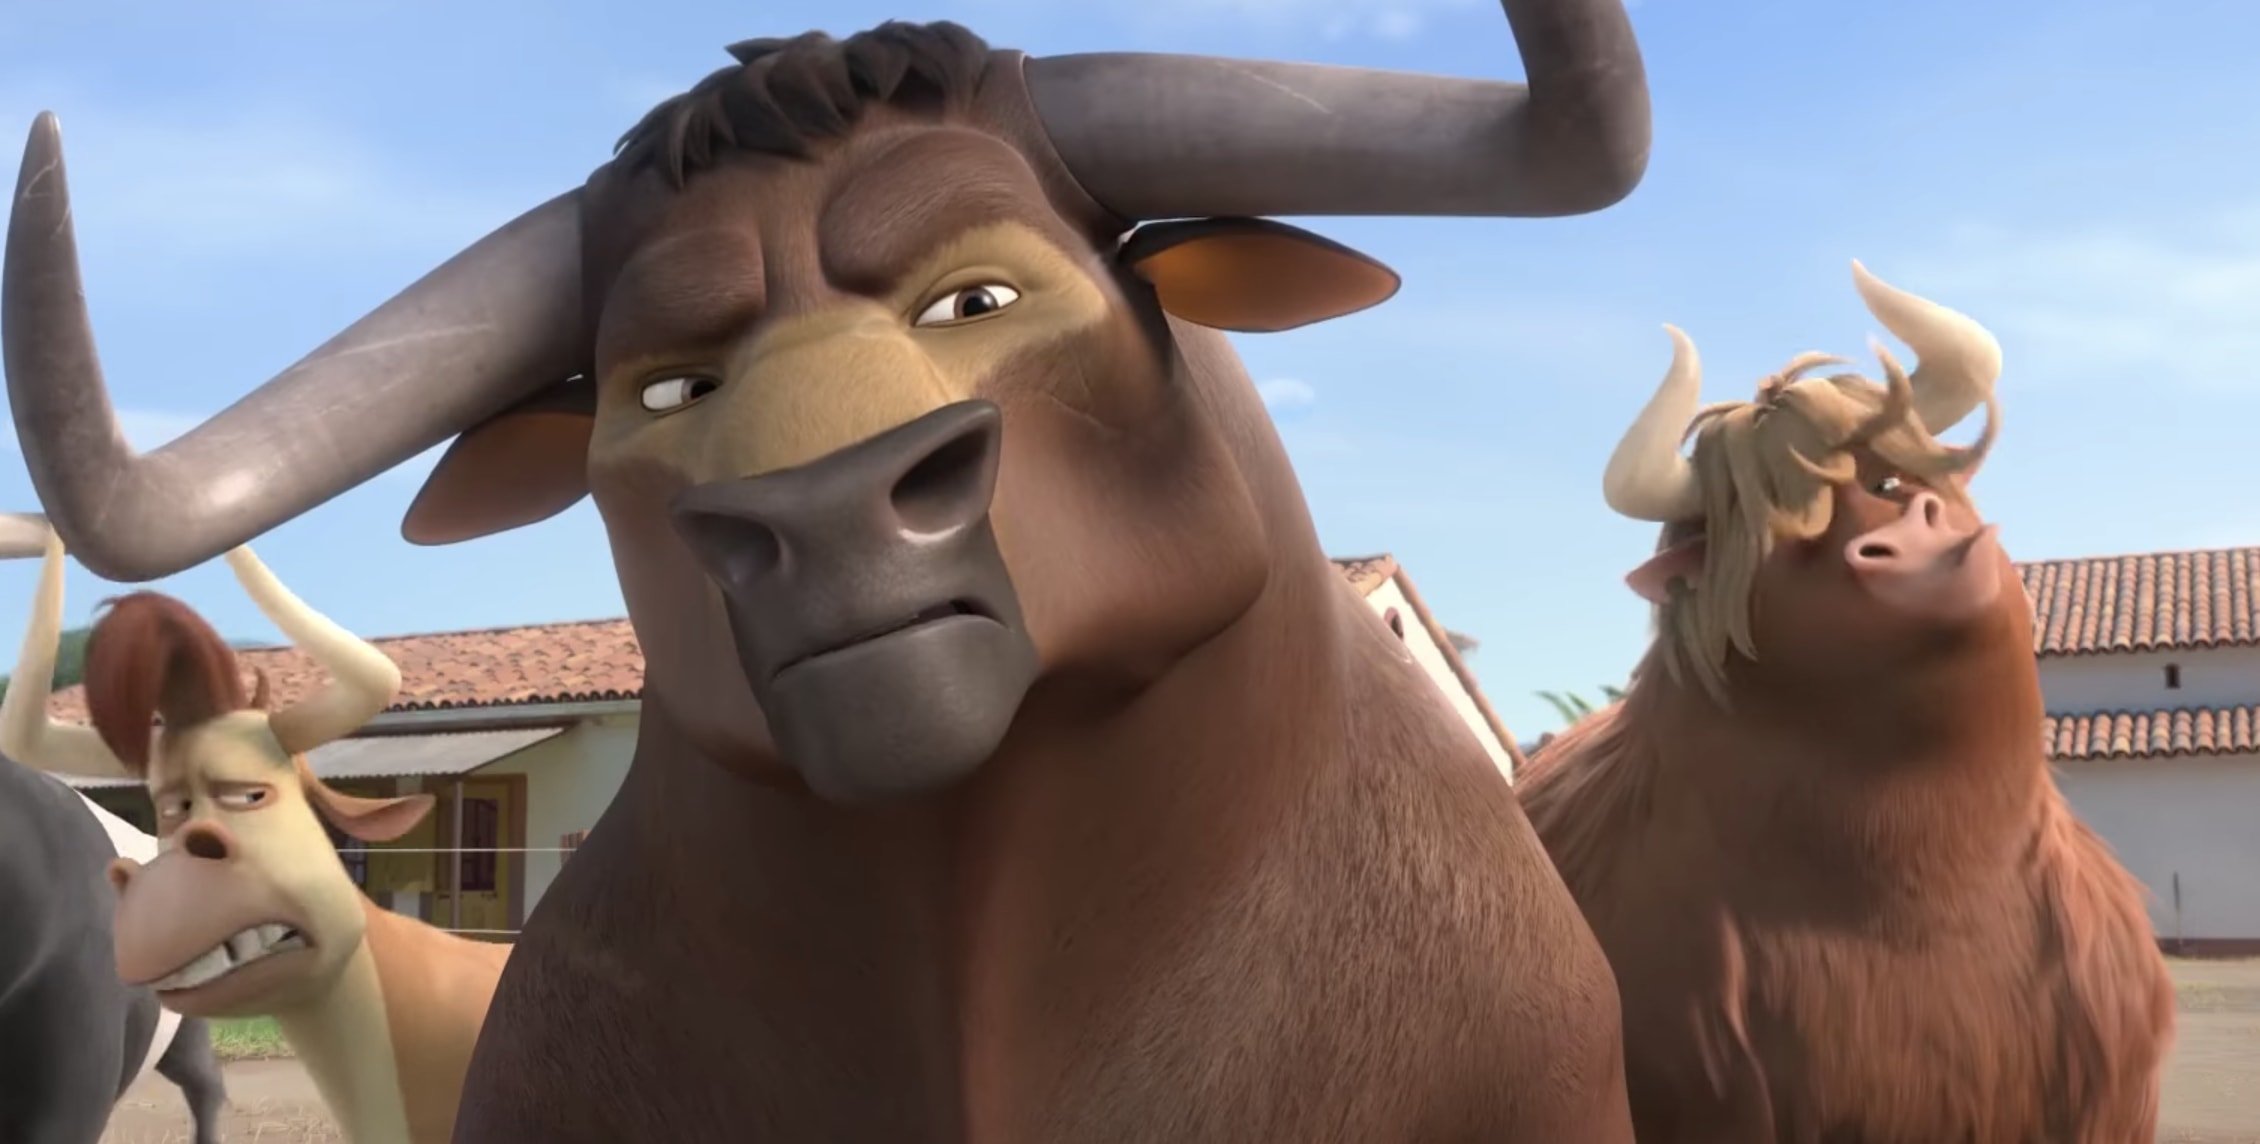 OPINION: 'Animal Rights' Film 'Ferdinand' Could Actually Promote  Bullfighting